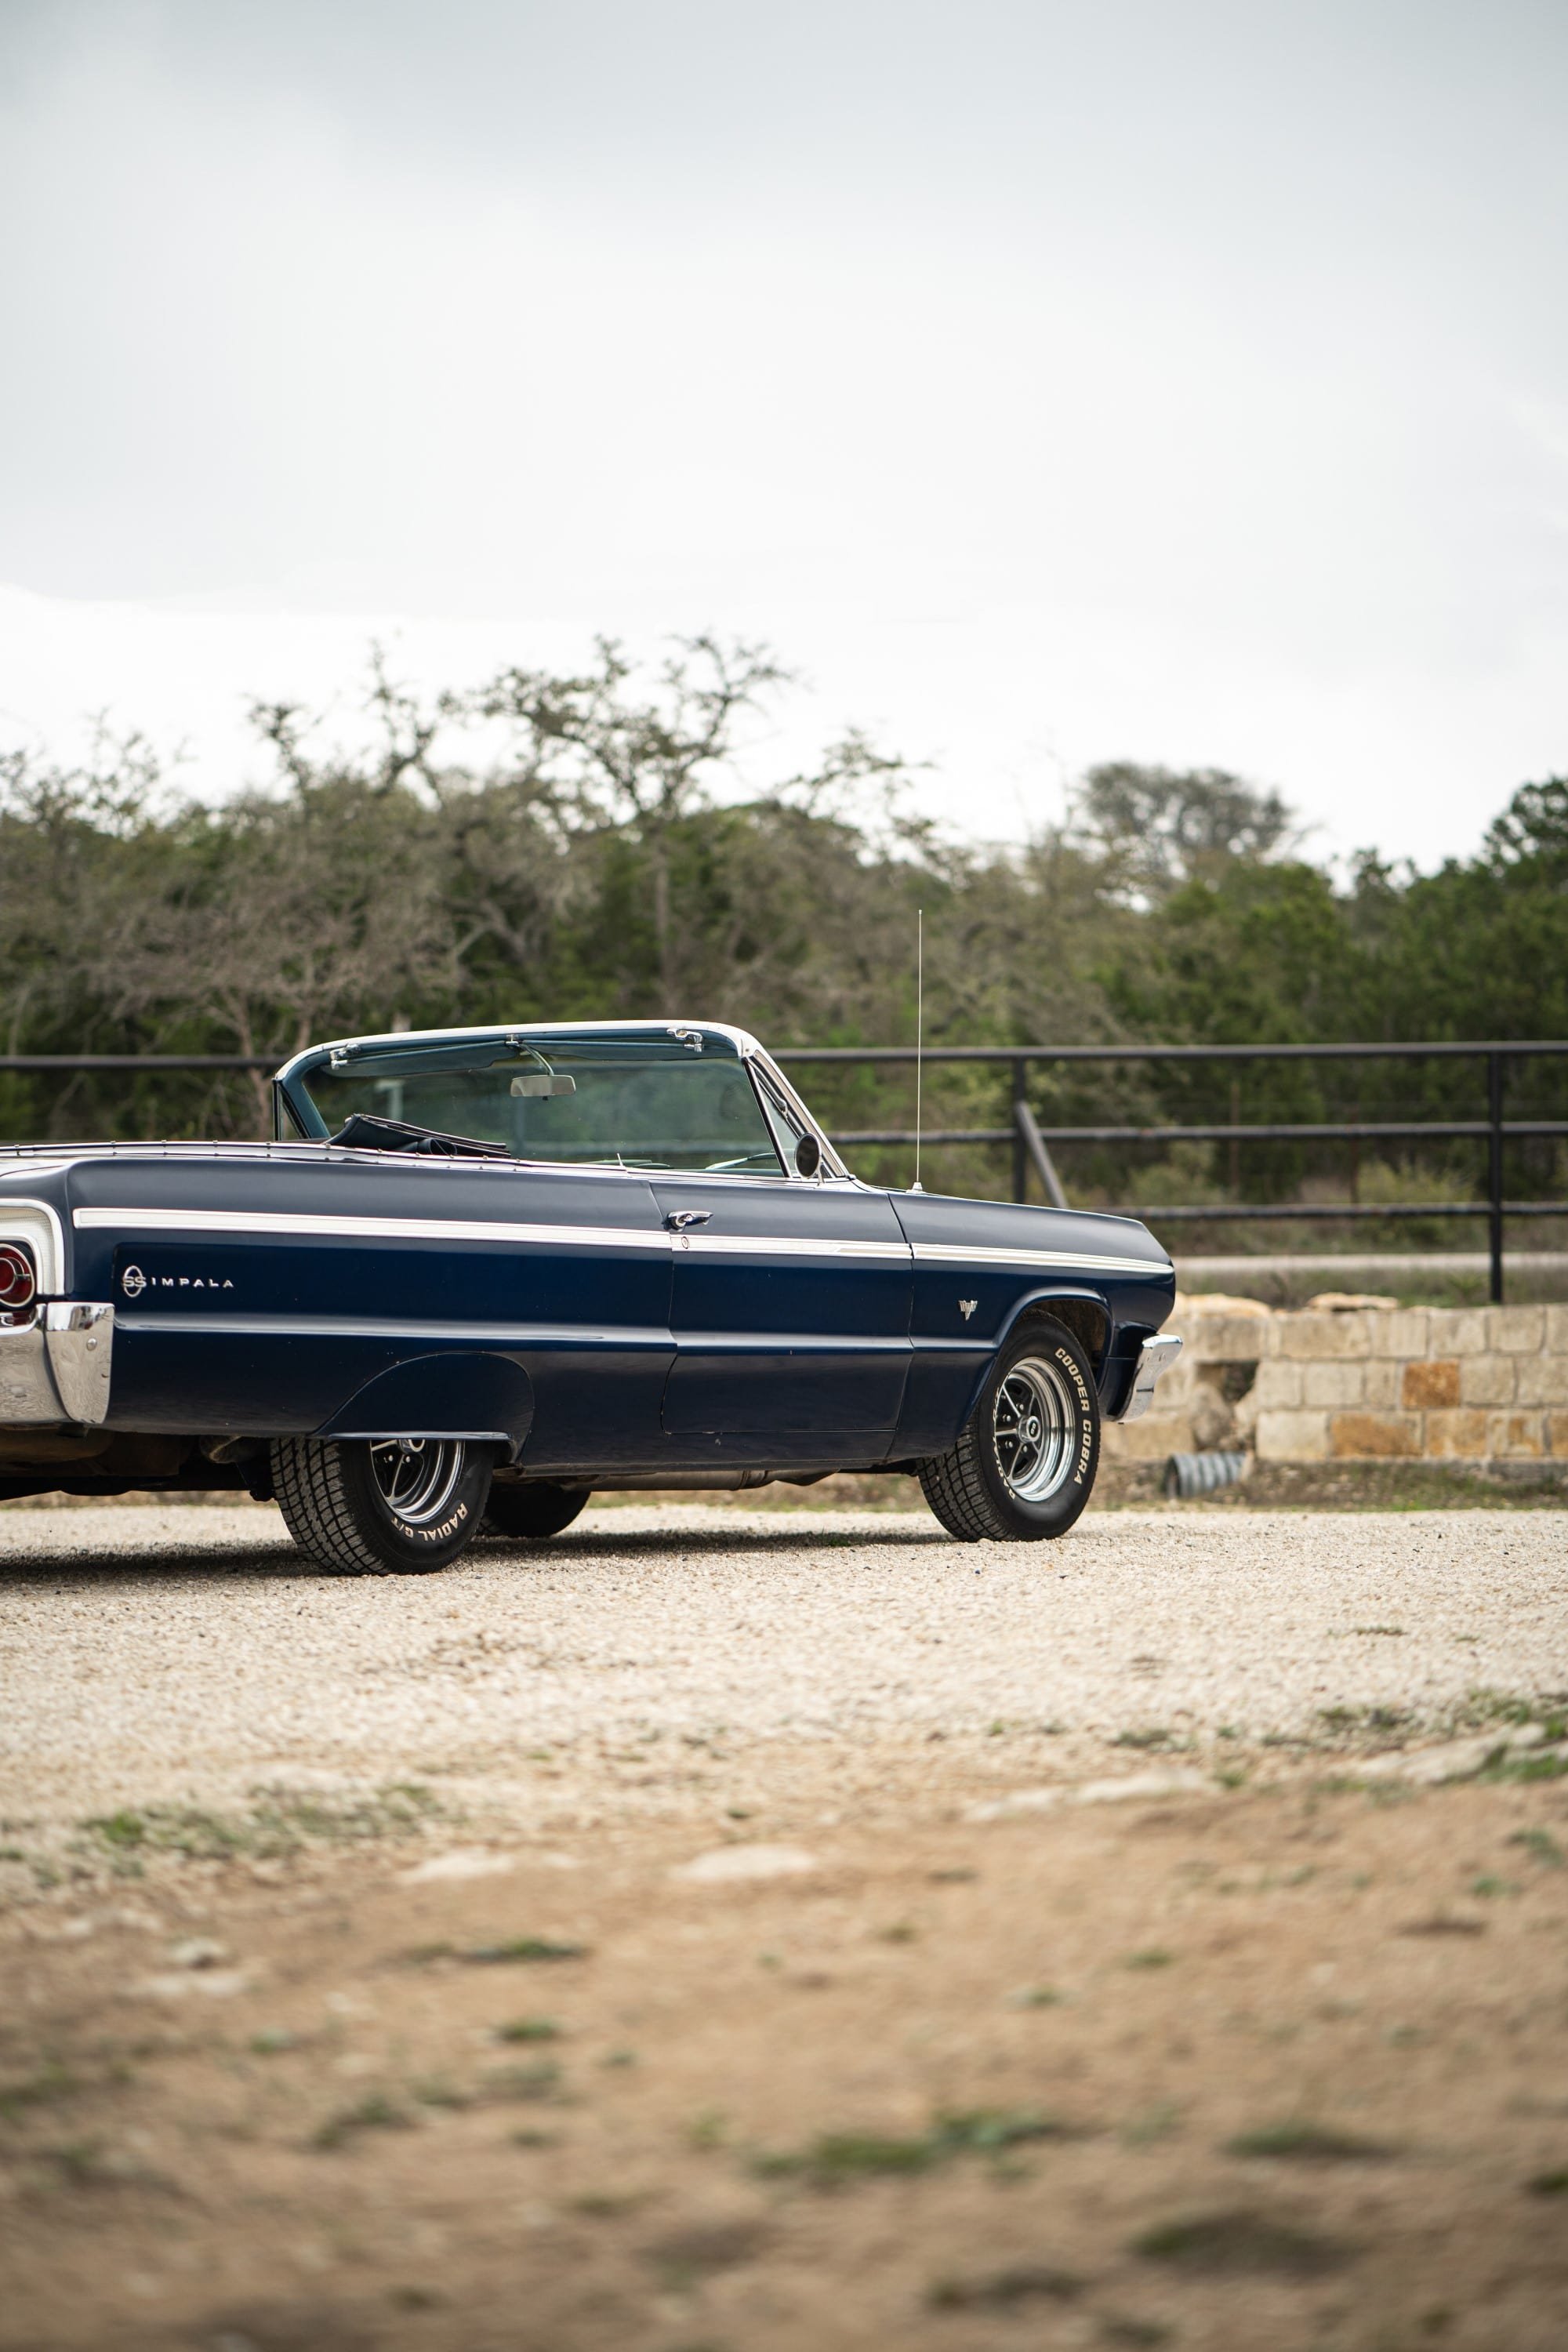 Blue Impala SS Convertible in Dripping Springs, TX